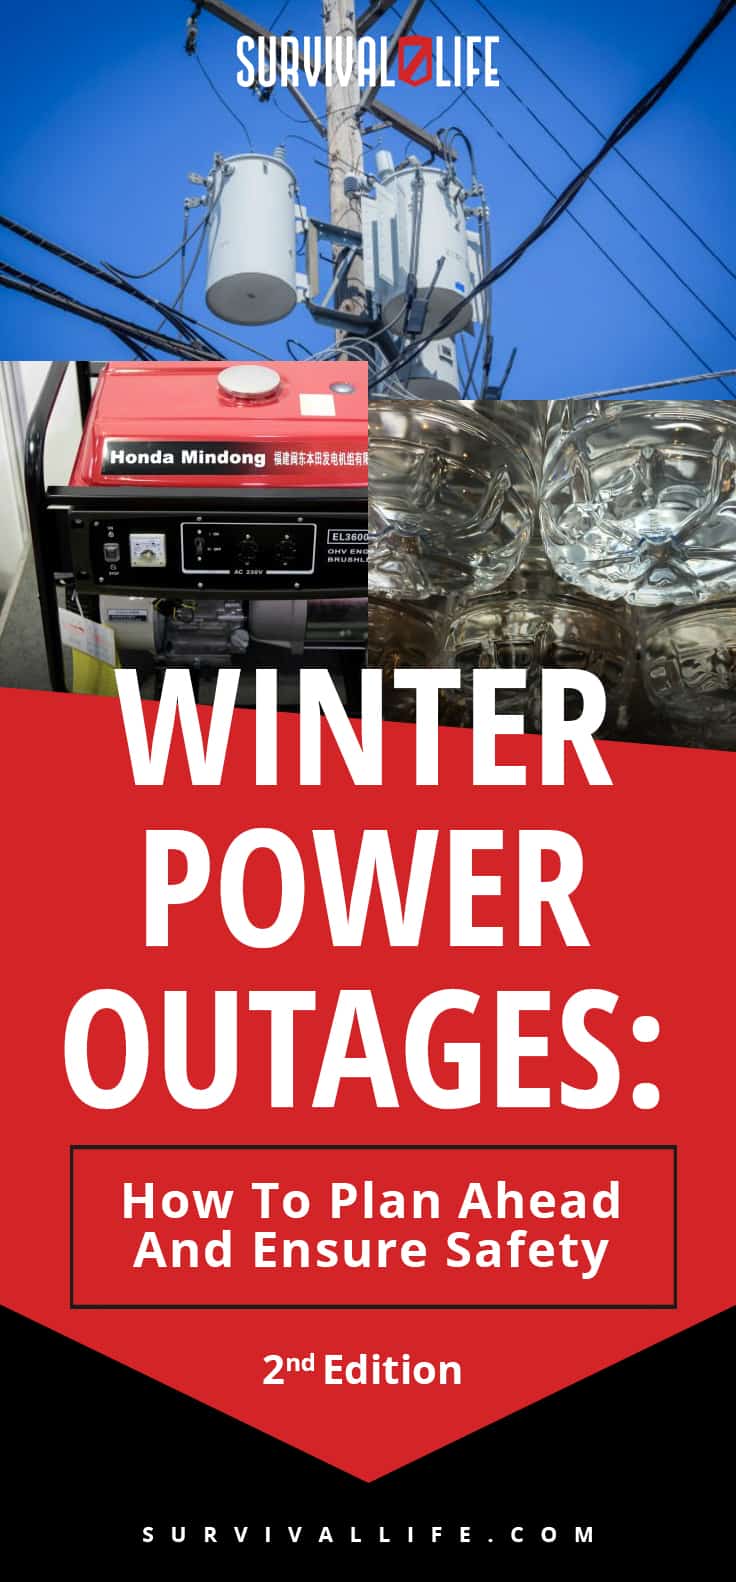 Power Outages | Winter Power Outages: How To Plan Ahead And Ensure Safety